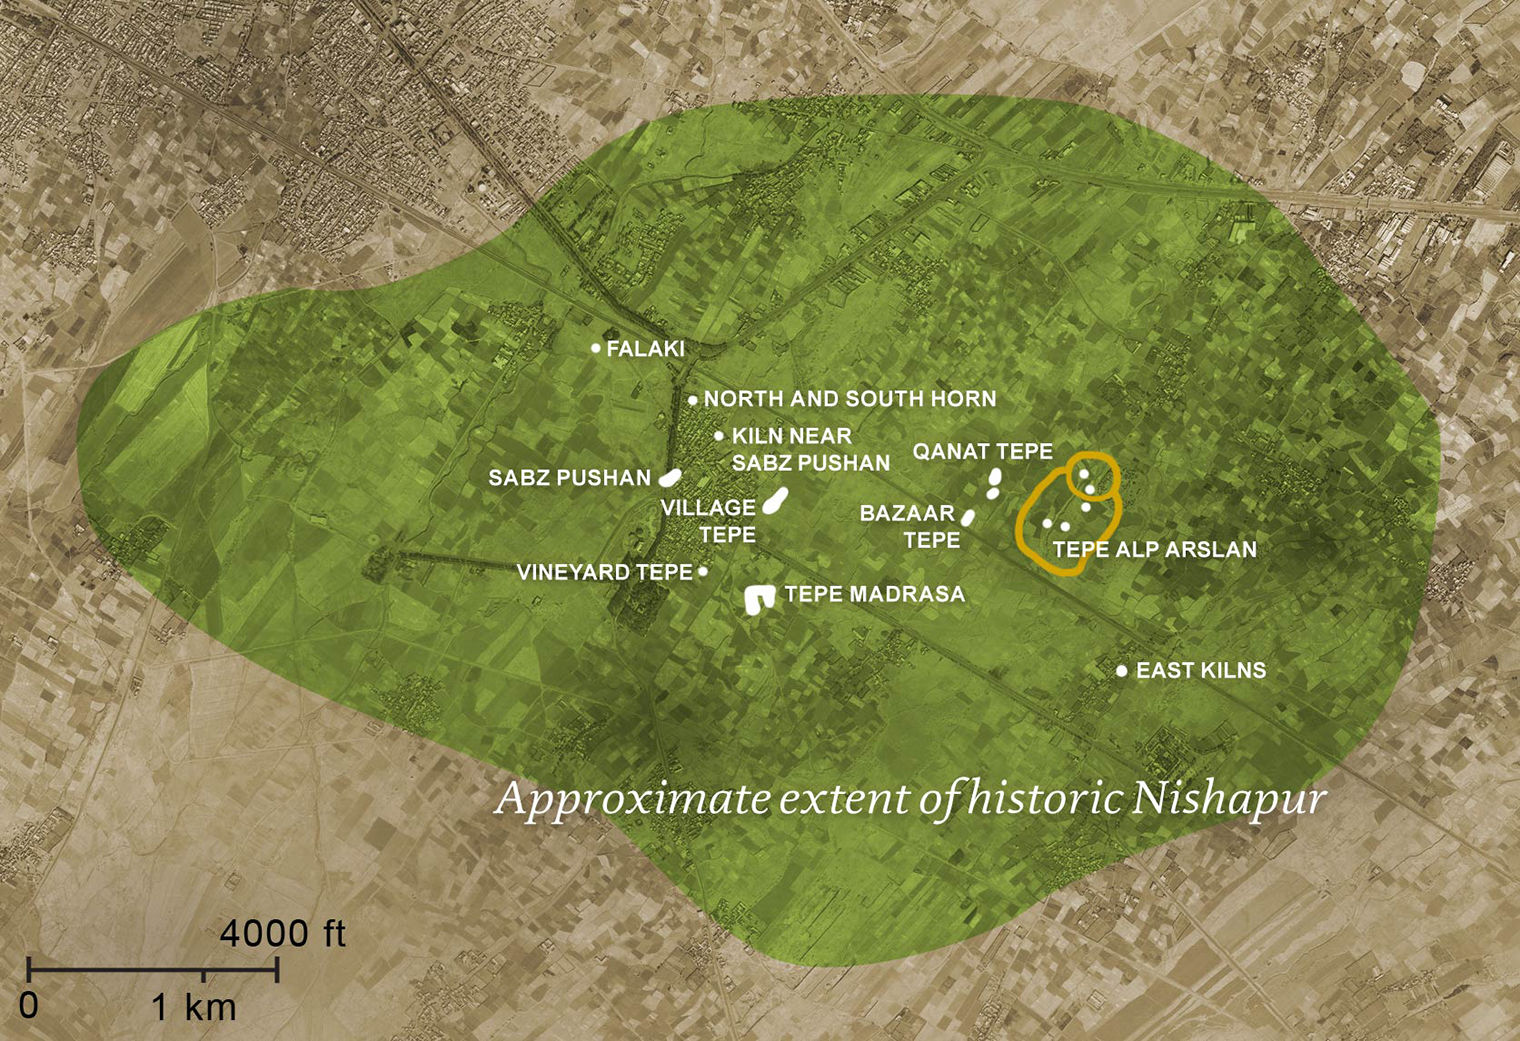 Aerial map of historic Nishapur highlighted in green showing approximate extent with different sites written in white text